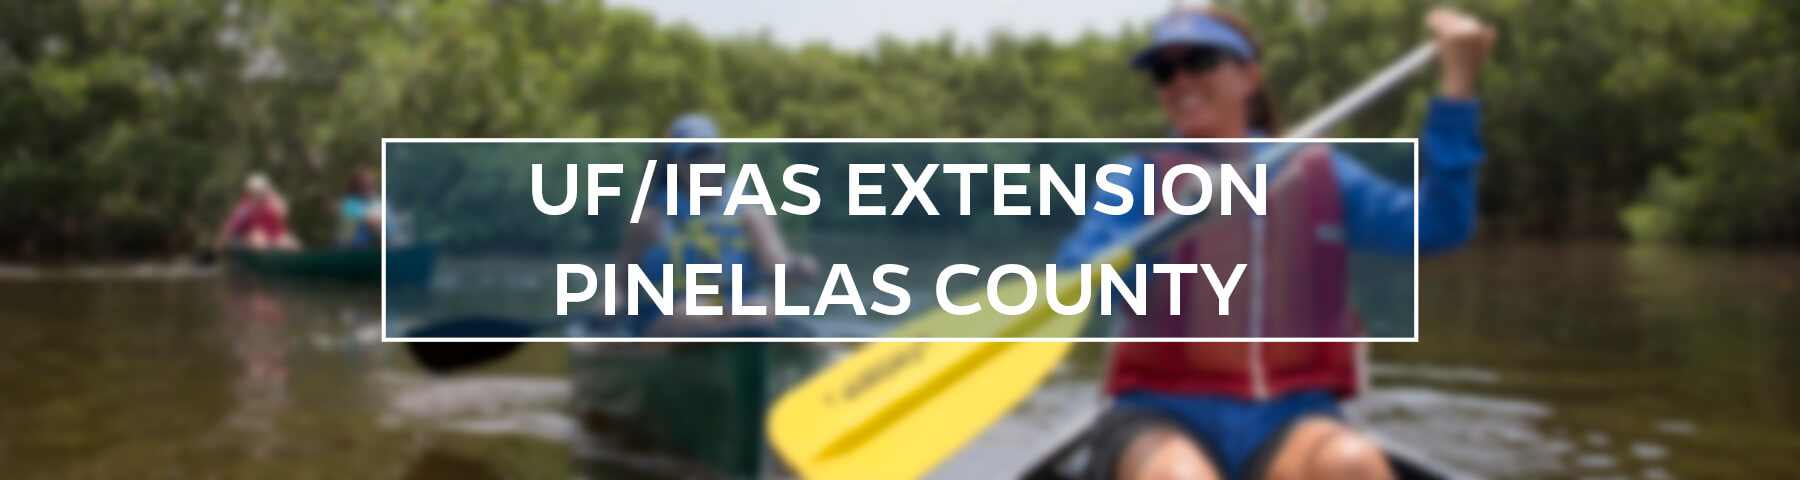 UF/IFAS Extension Pinellas County